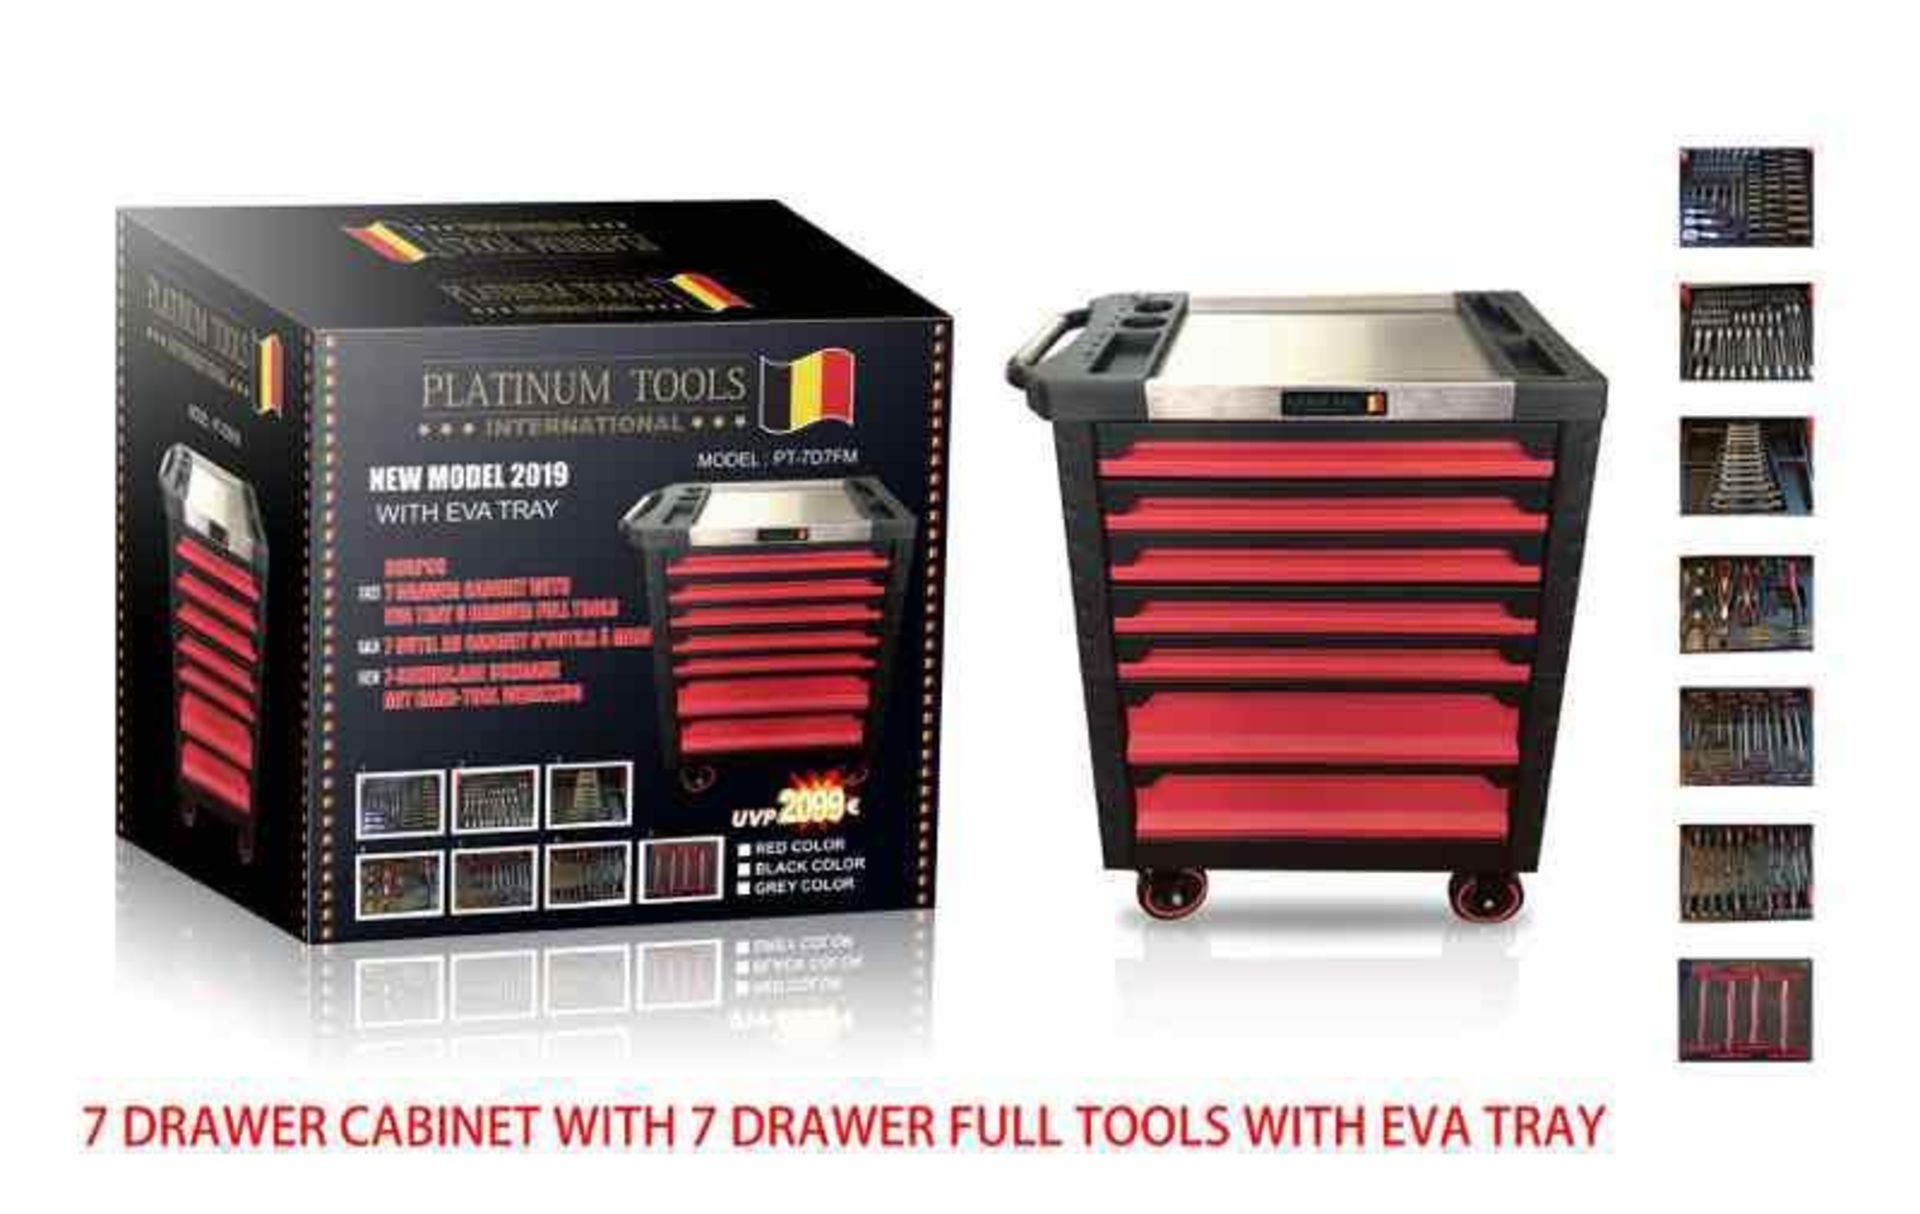 V Brand New Professional Locking Garage Tool Trolley/Cabinet (Red/Blue) With Metal Top And 7 Drawers